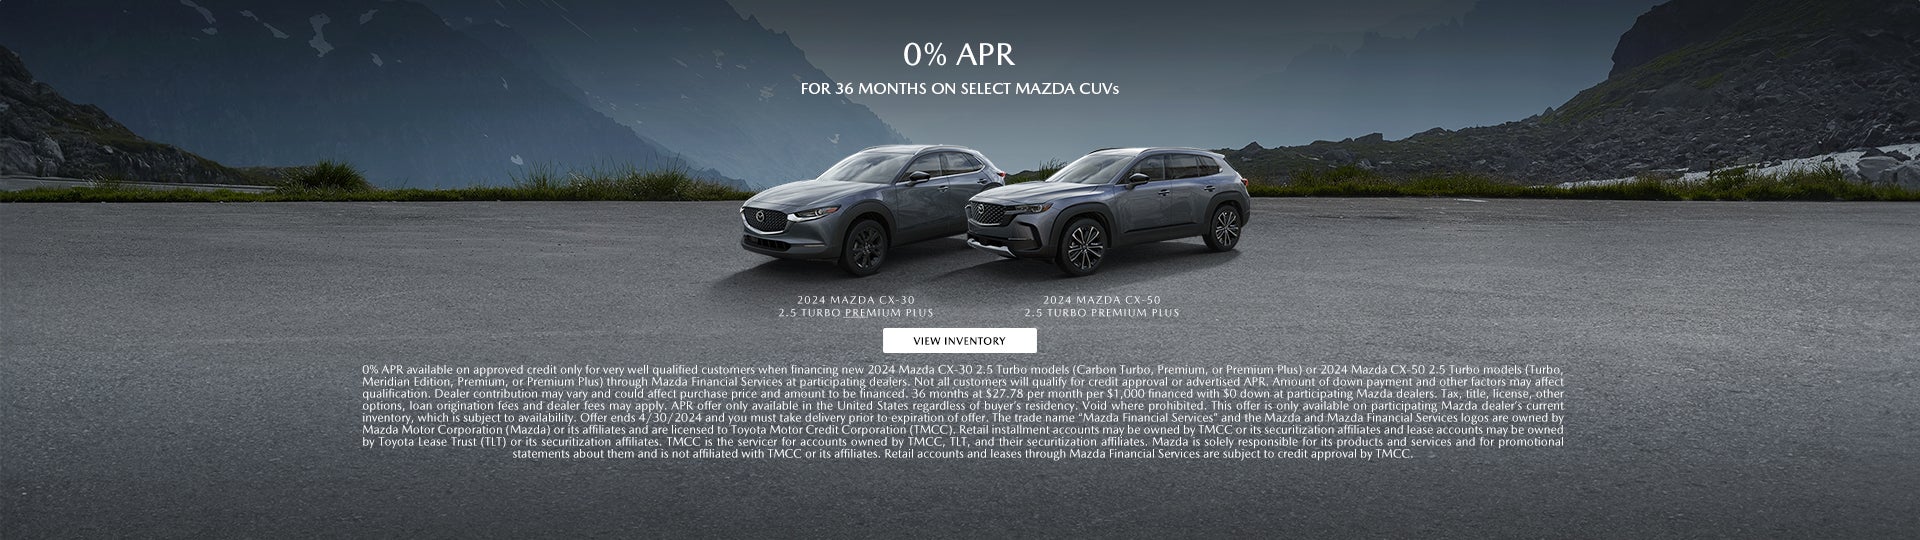 CX-30 and CX-50 offer